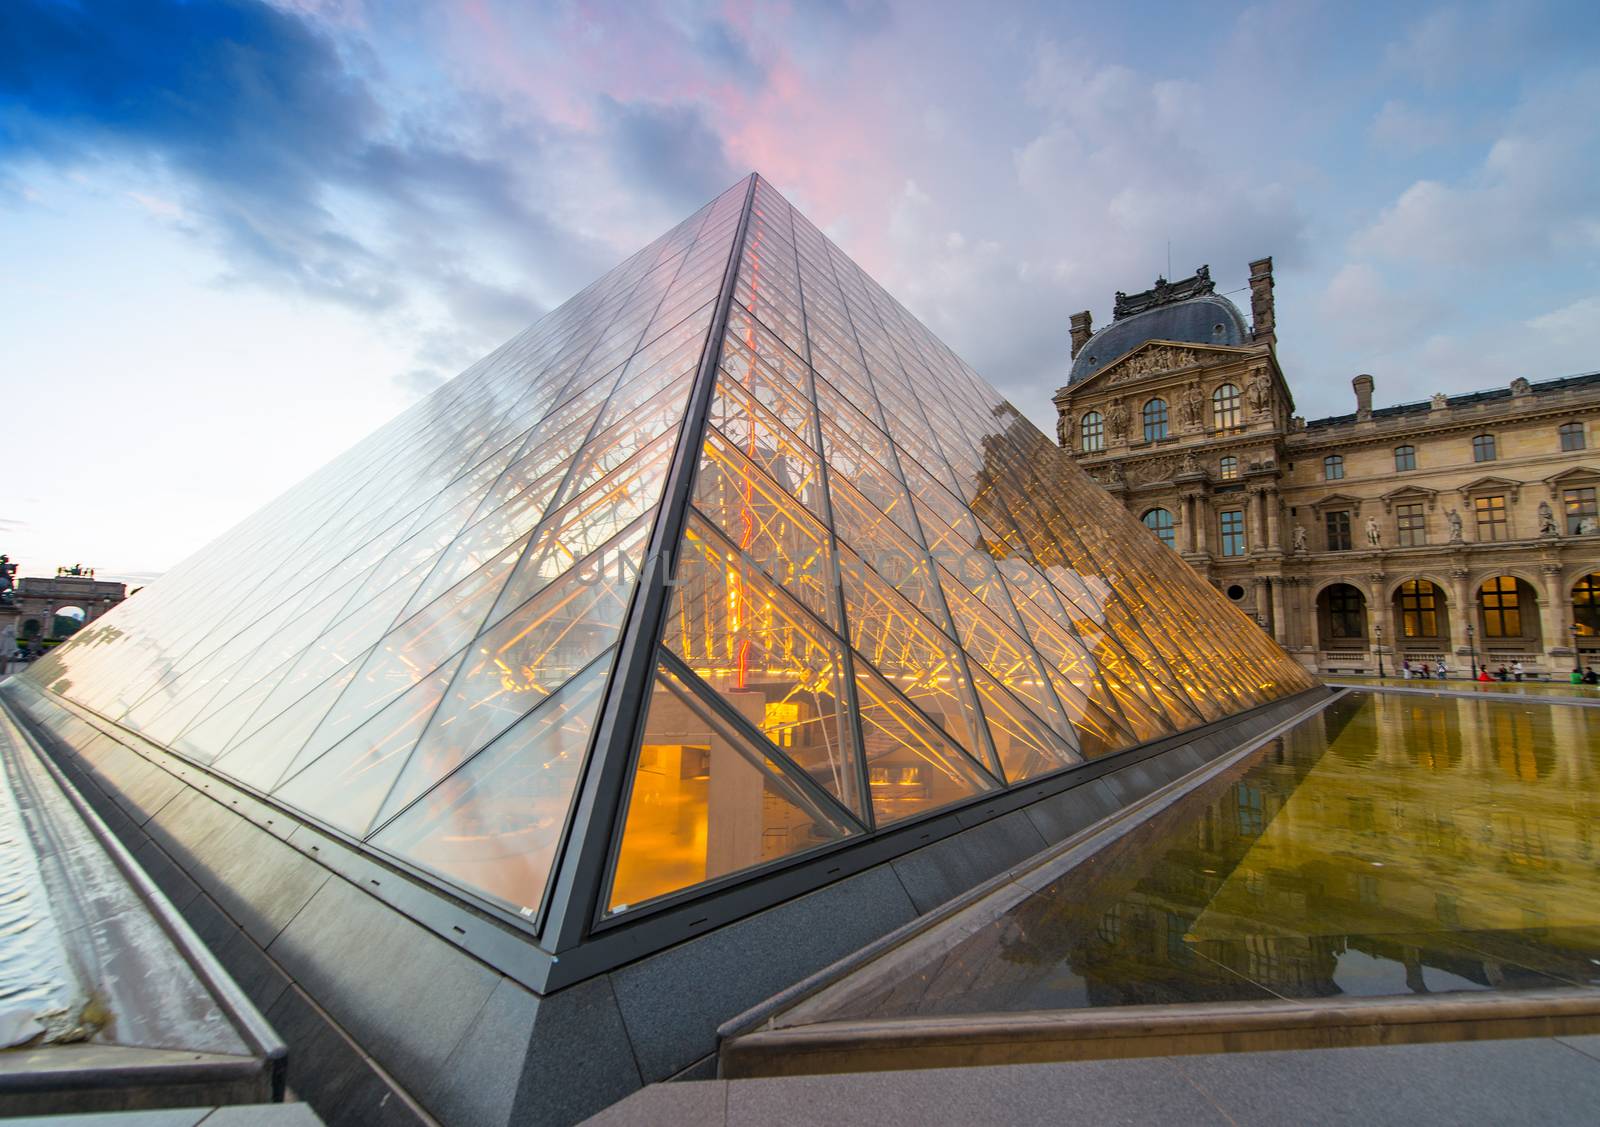 PARIS - JUNE 15 : Louvre museum at twilight in summer on June 15, 2014. Louvre museum is one of the world's largest museums with more than 8 million visitors each year